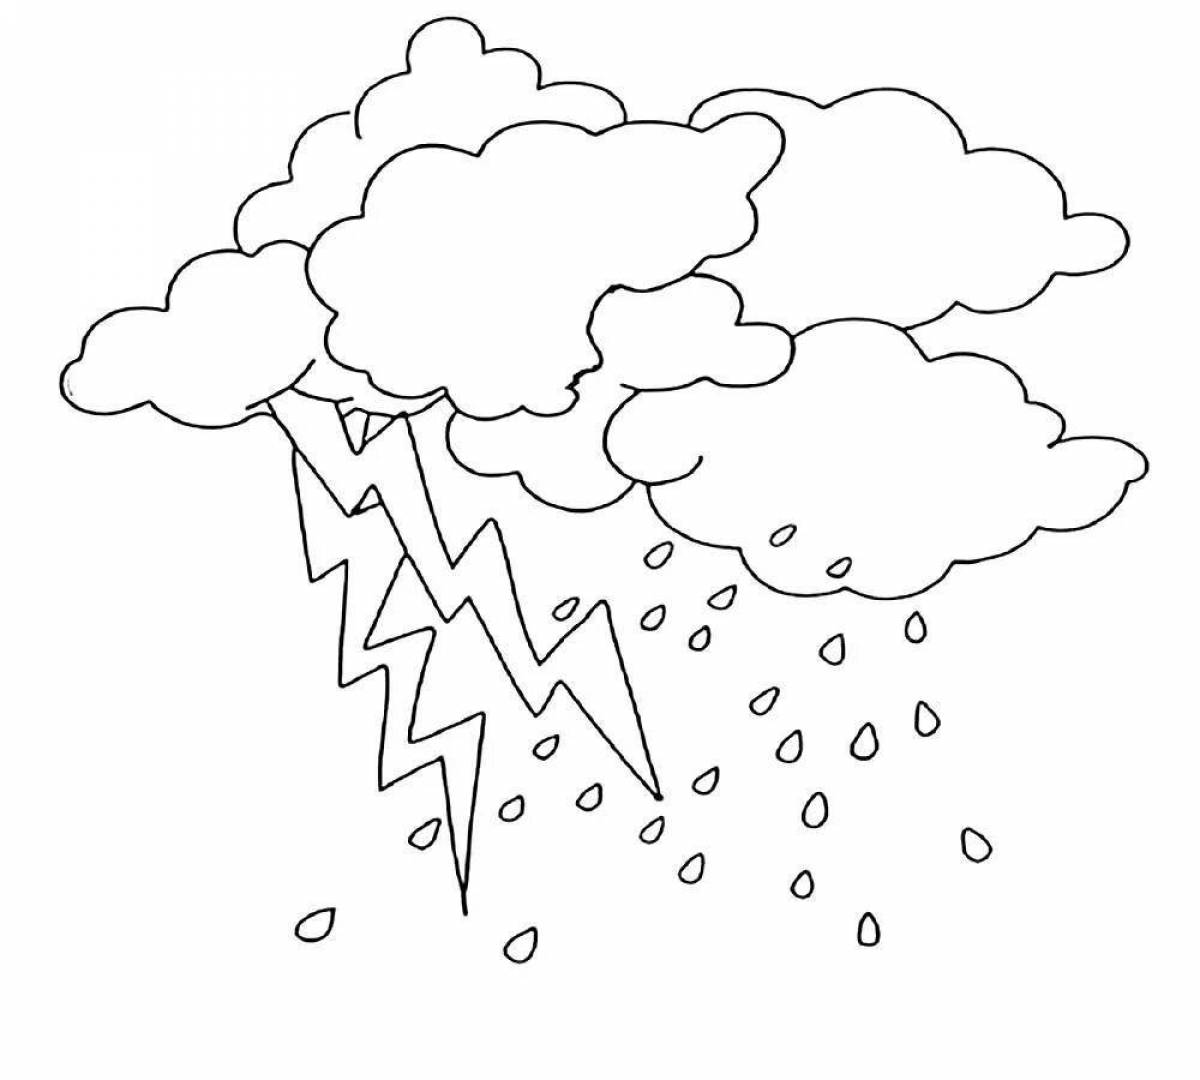 Fun coloring book for kids with rain